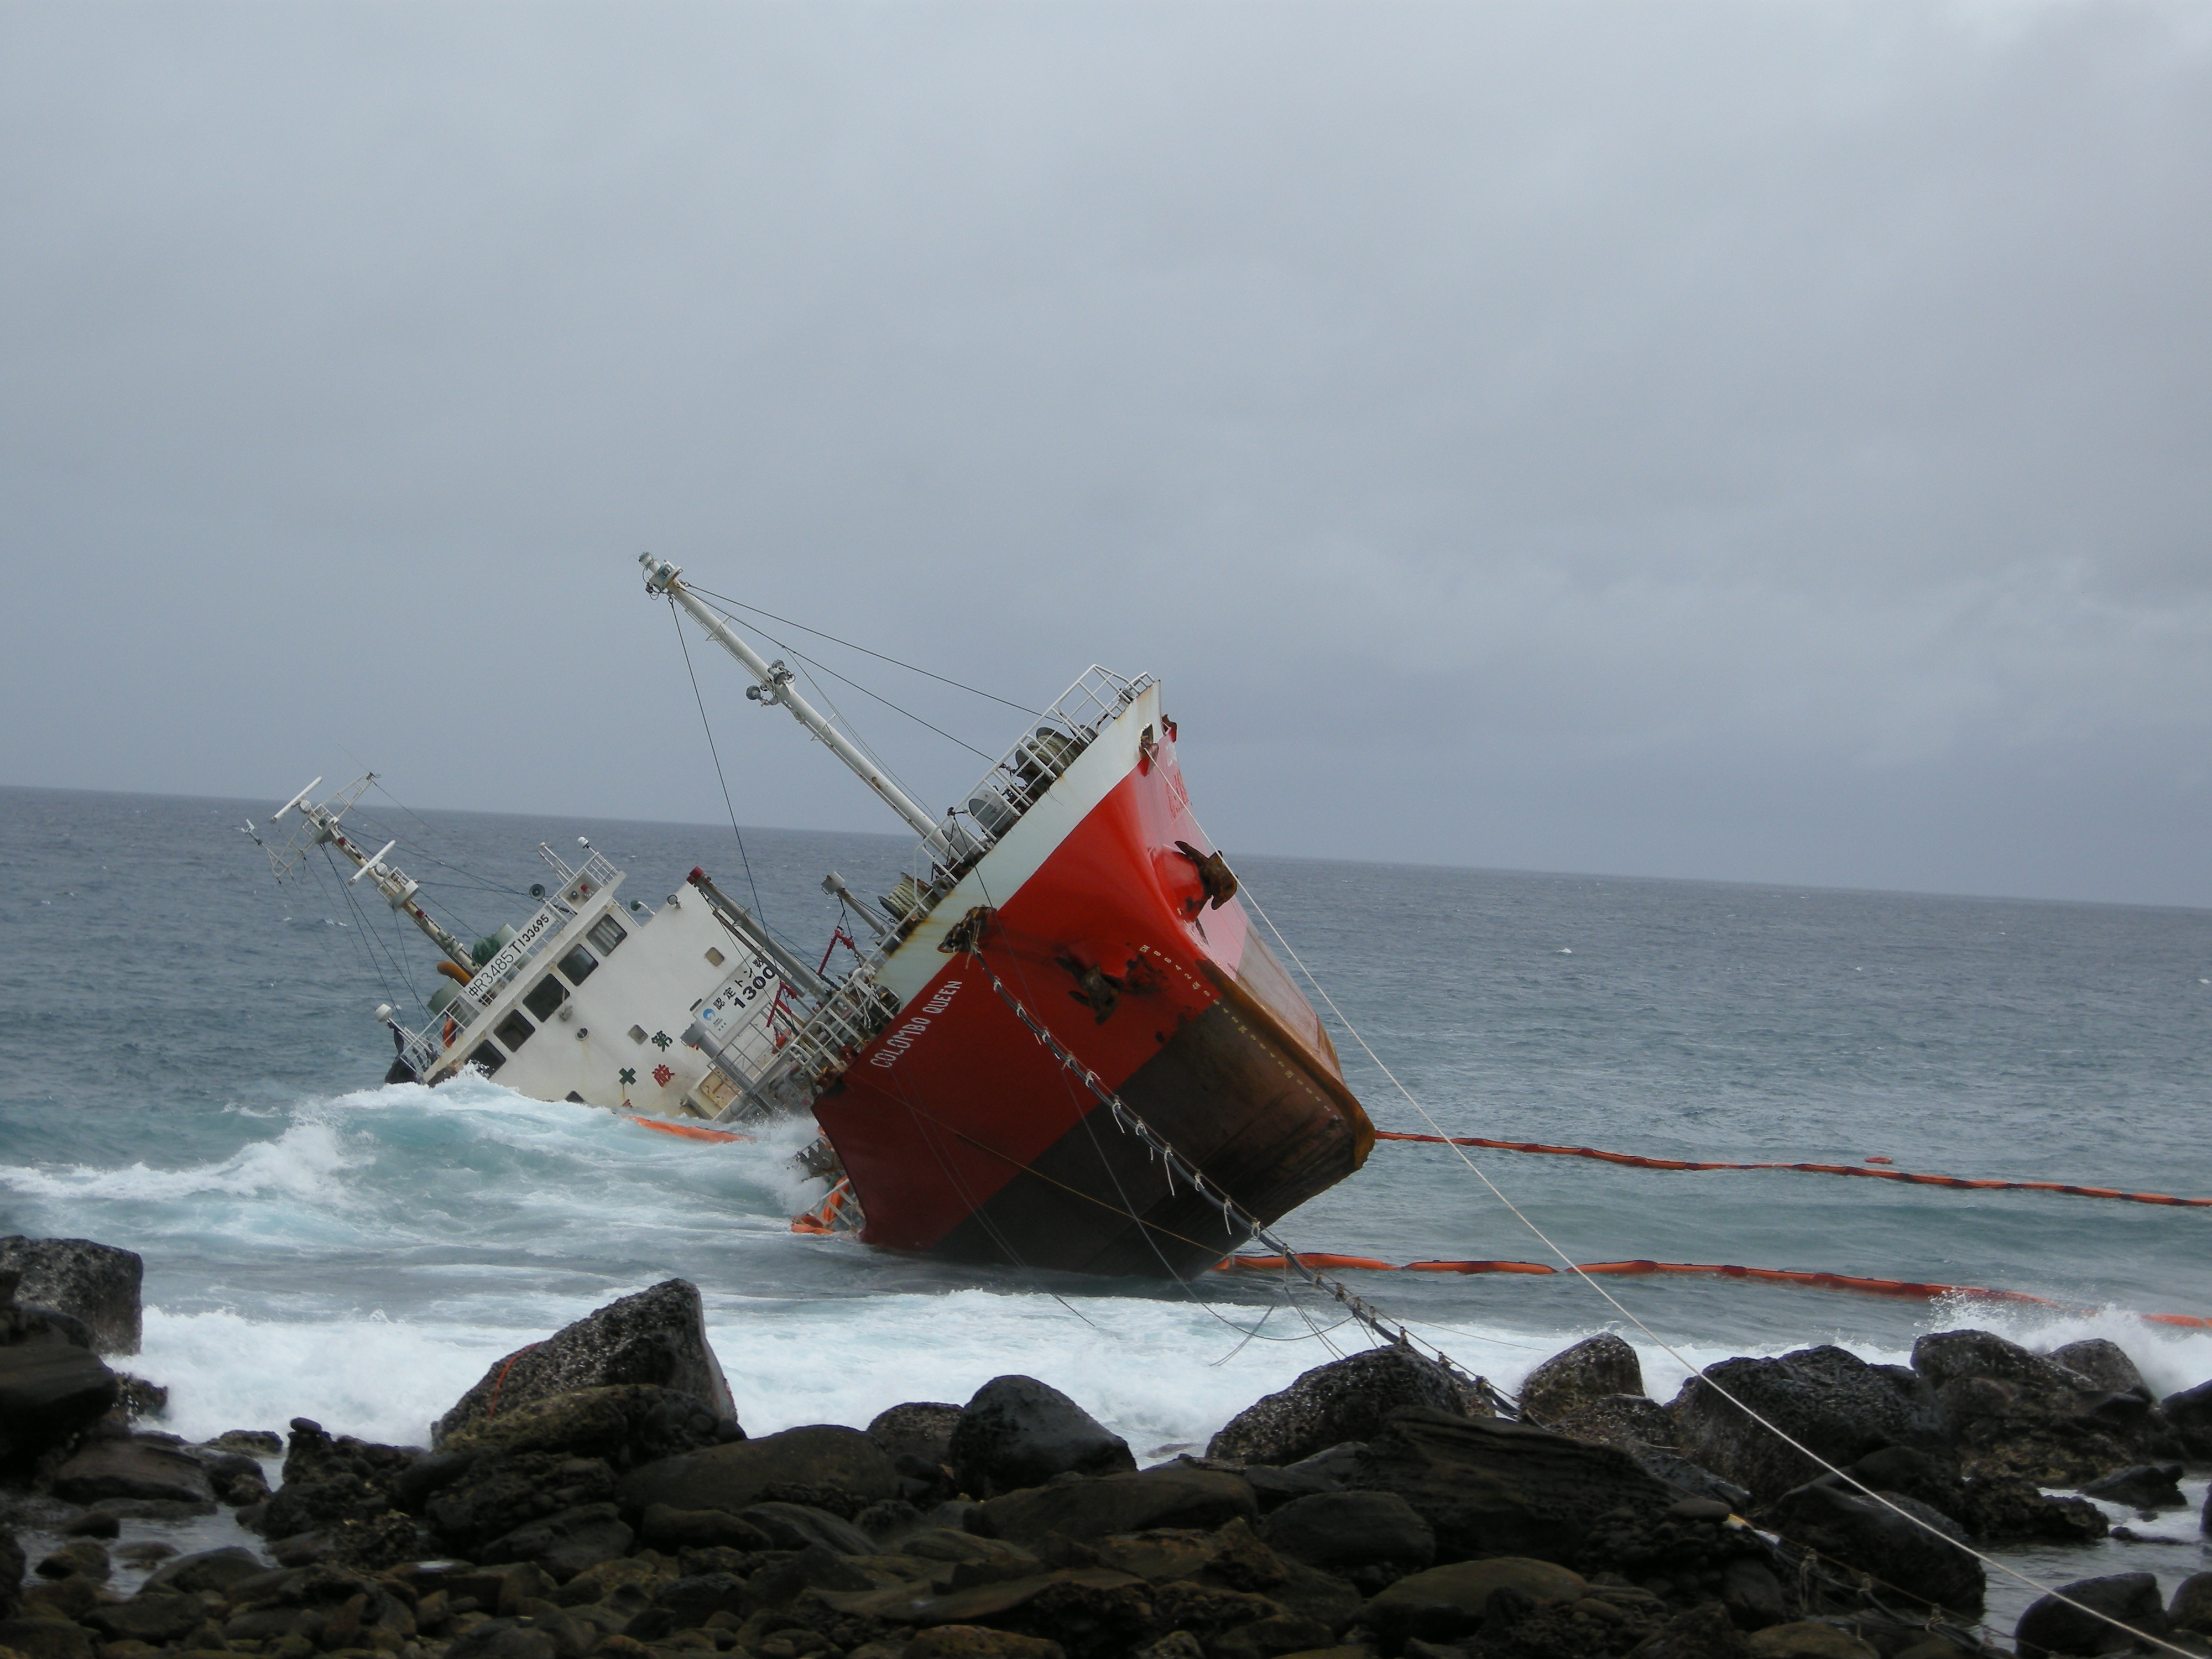 The Colombo Queen run aground during Linfa